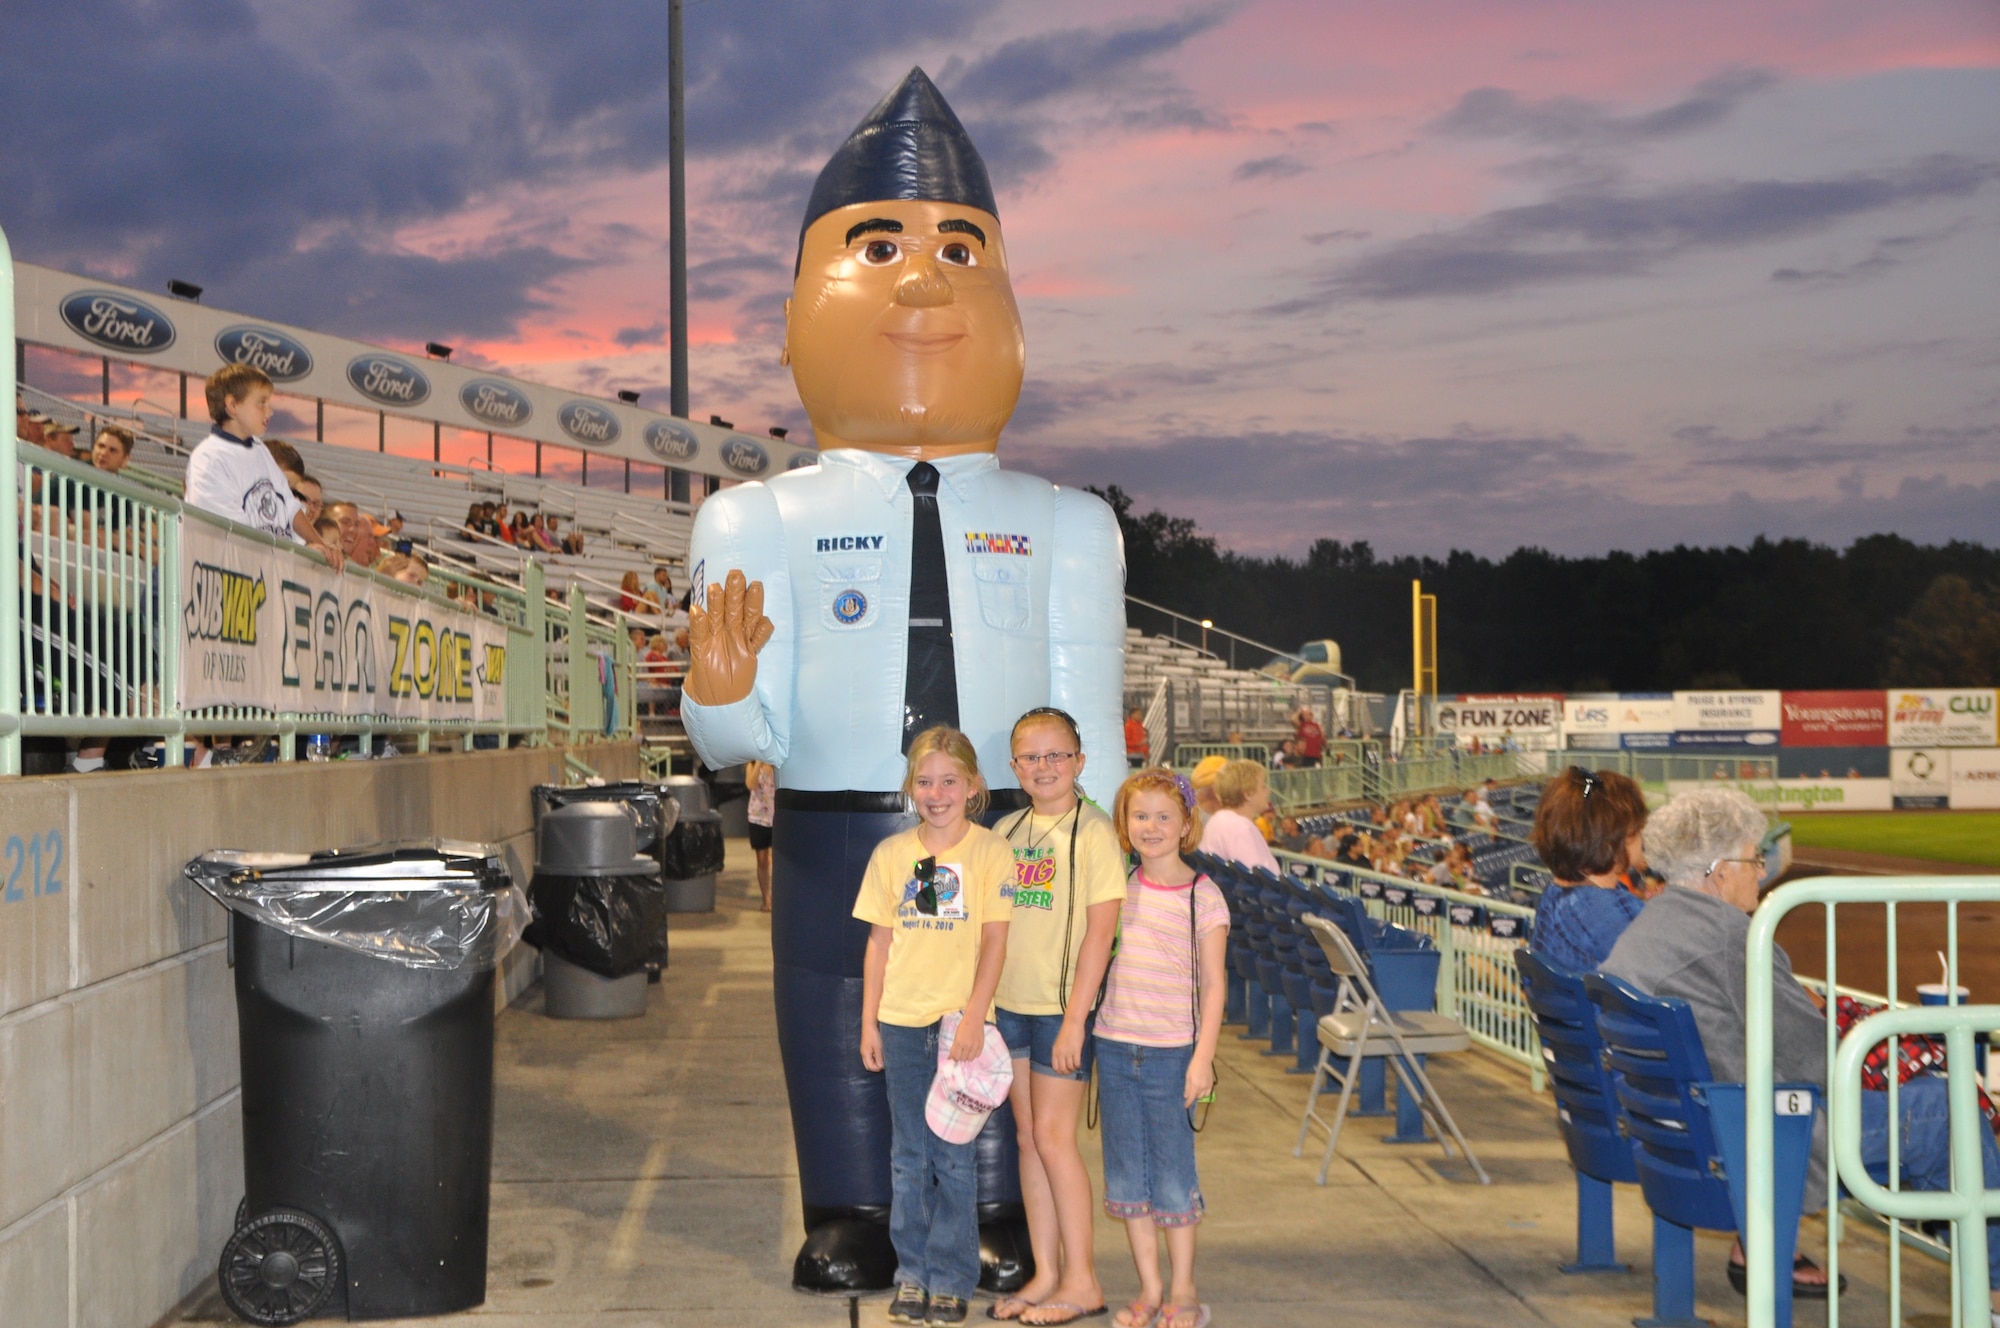 U.S. Air Force Reserve 910th Airlift Wing mascot, Airman Ricky, stands with a group of young fans during a minor league baseball game between the Cleveland Indians Class A affiliate Mahoning Valley Scrappers and the Lowell Spinners at Eastwood Field here, August 7, 2013. Nearly 200 Citizen Airmen along with their families, friends and co-workers were in attendance and representatives from the 910th, based at nearby YARS, were involved in many game night activities. Special to 910th Airlift Wing Public Affairs/Photo by Nick Geraci